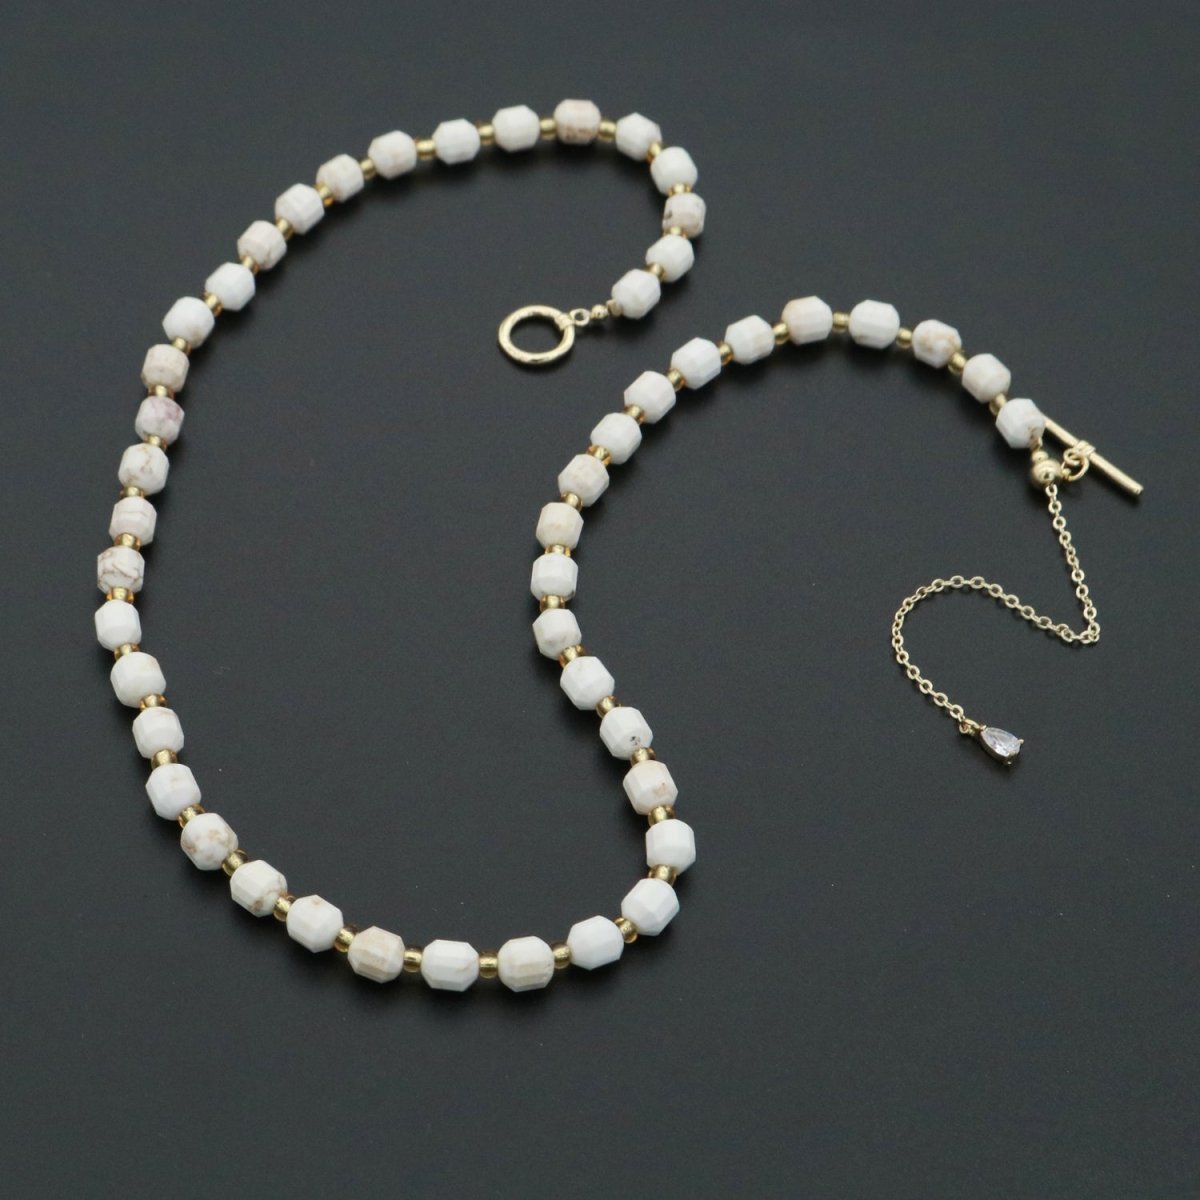 OS 5.5mm White Howlite Natural Gemstone Bead 16.5 Inch Choker Necklace w. Toggle Clasps | WA-254 Clearance Pricing - DLUXCA